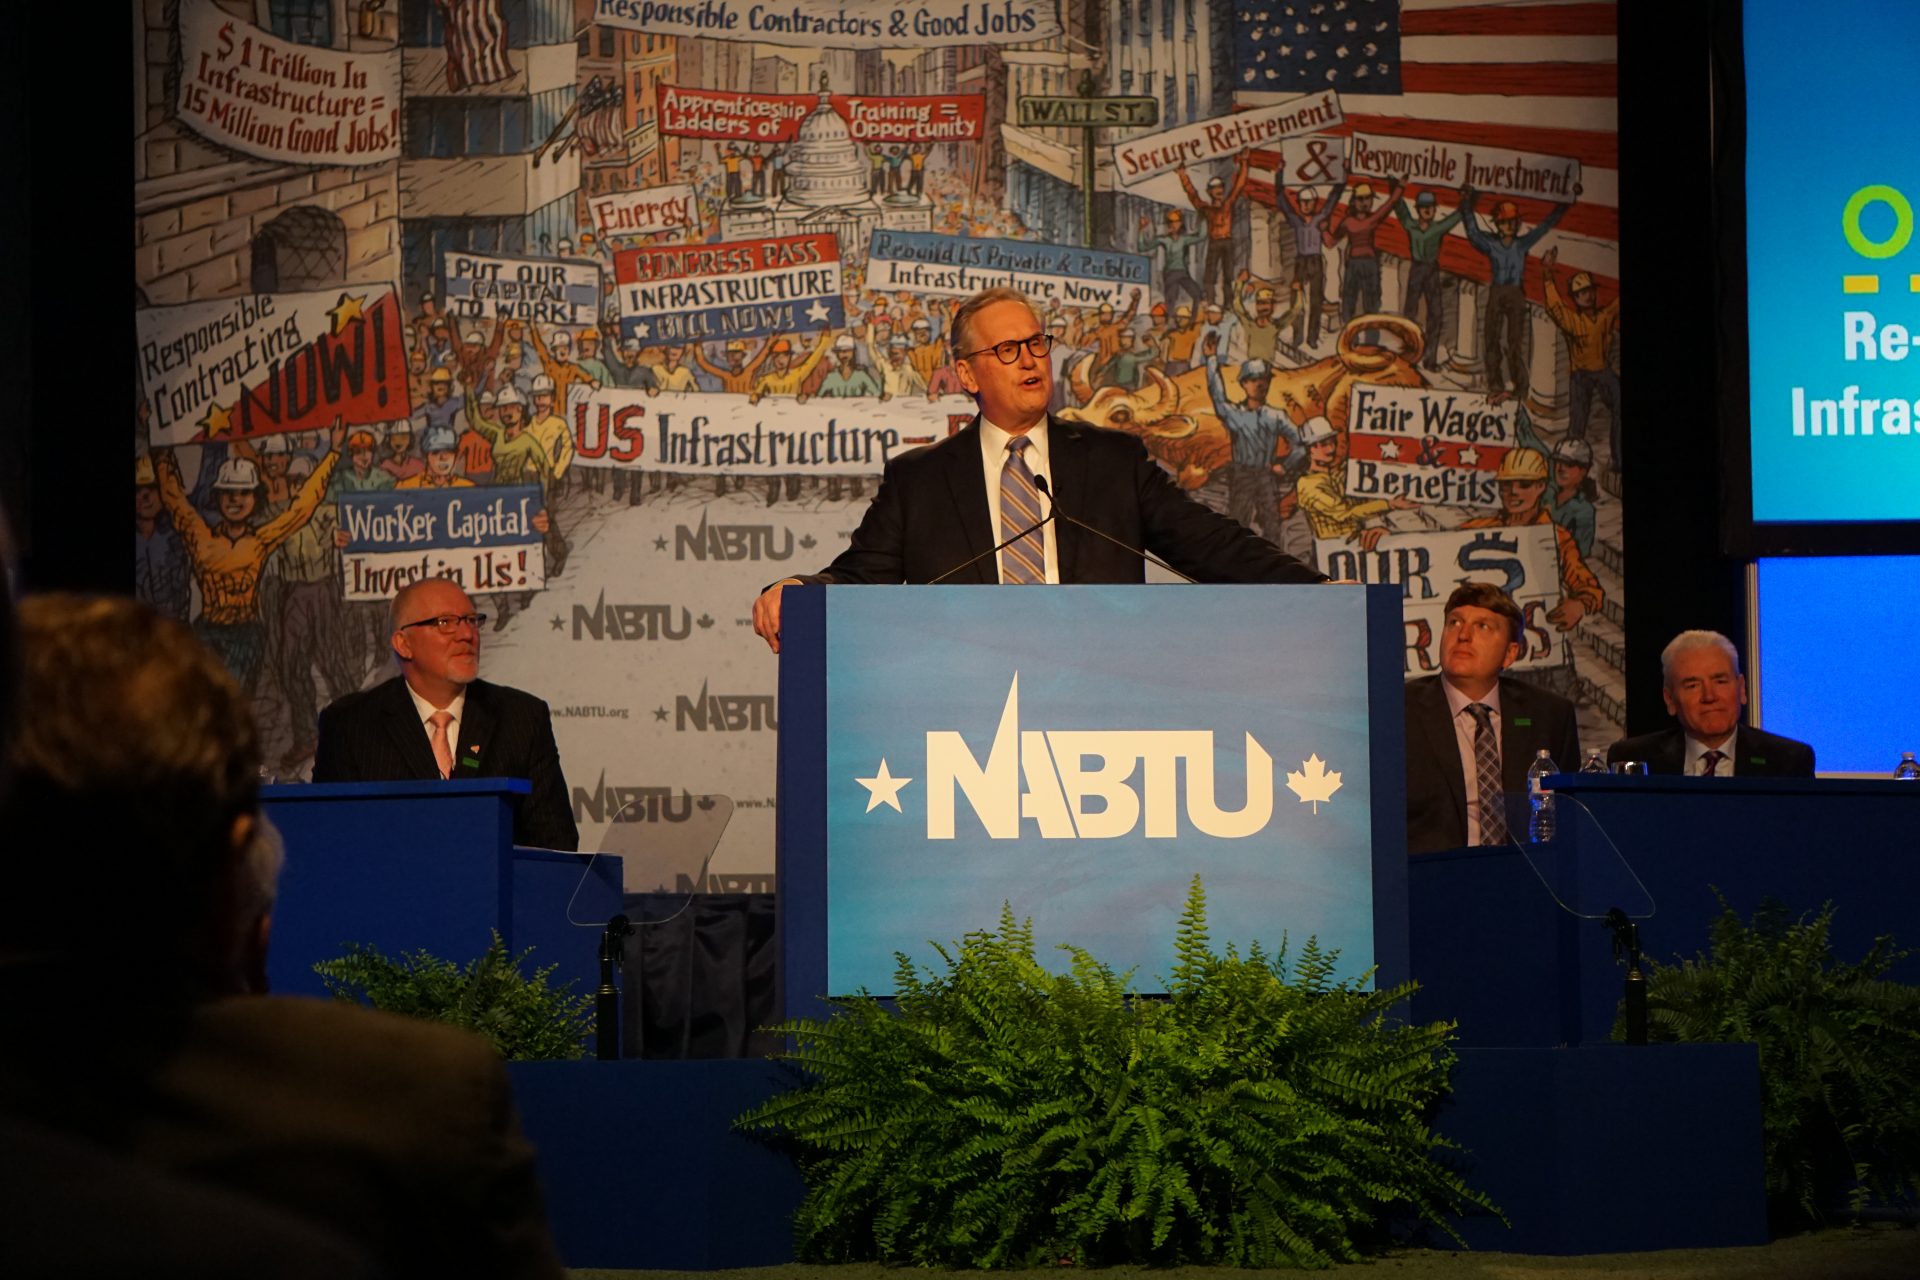 Image from the Gallery: North America’s Building Trades Unions: NABTU – Washington, D.C.